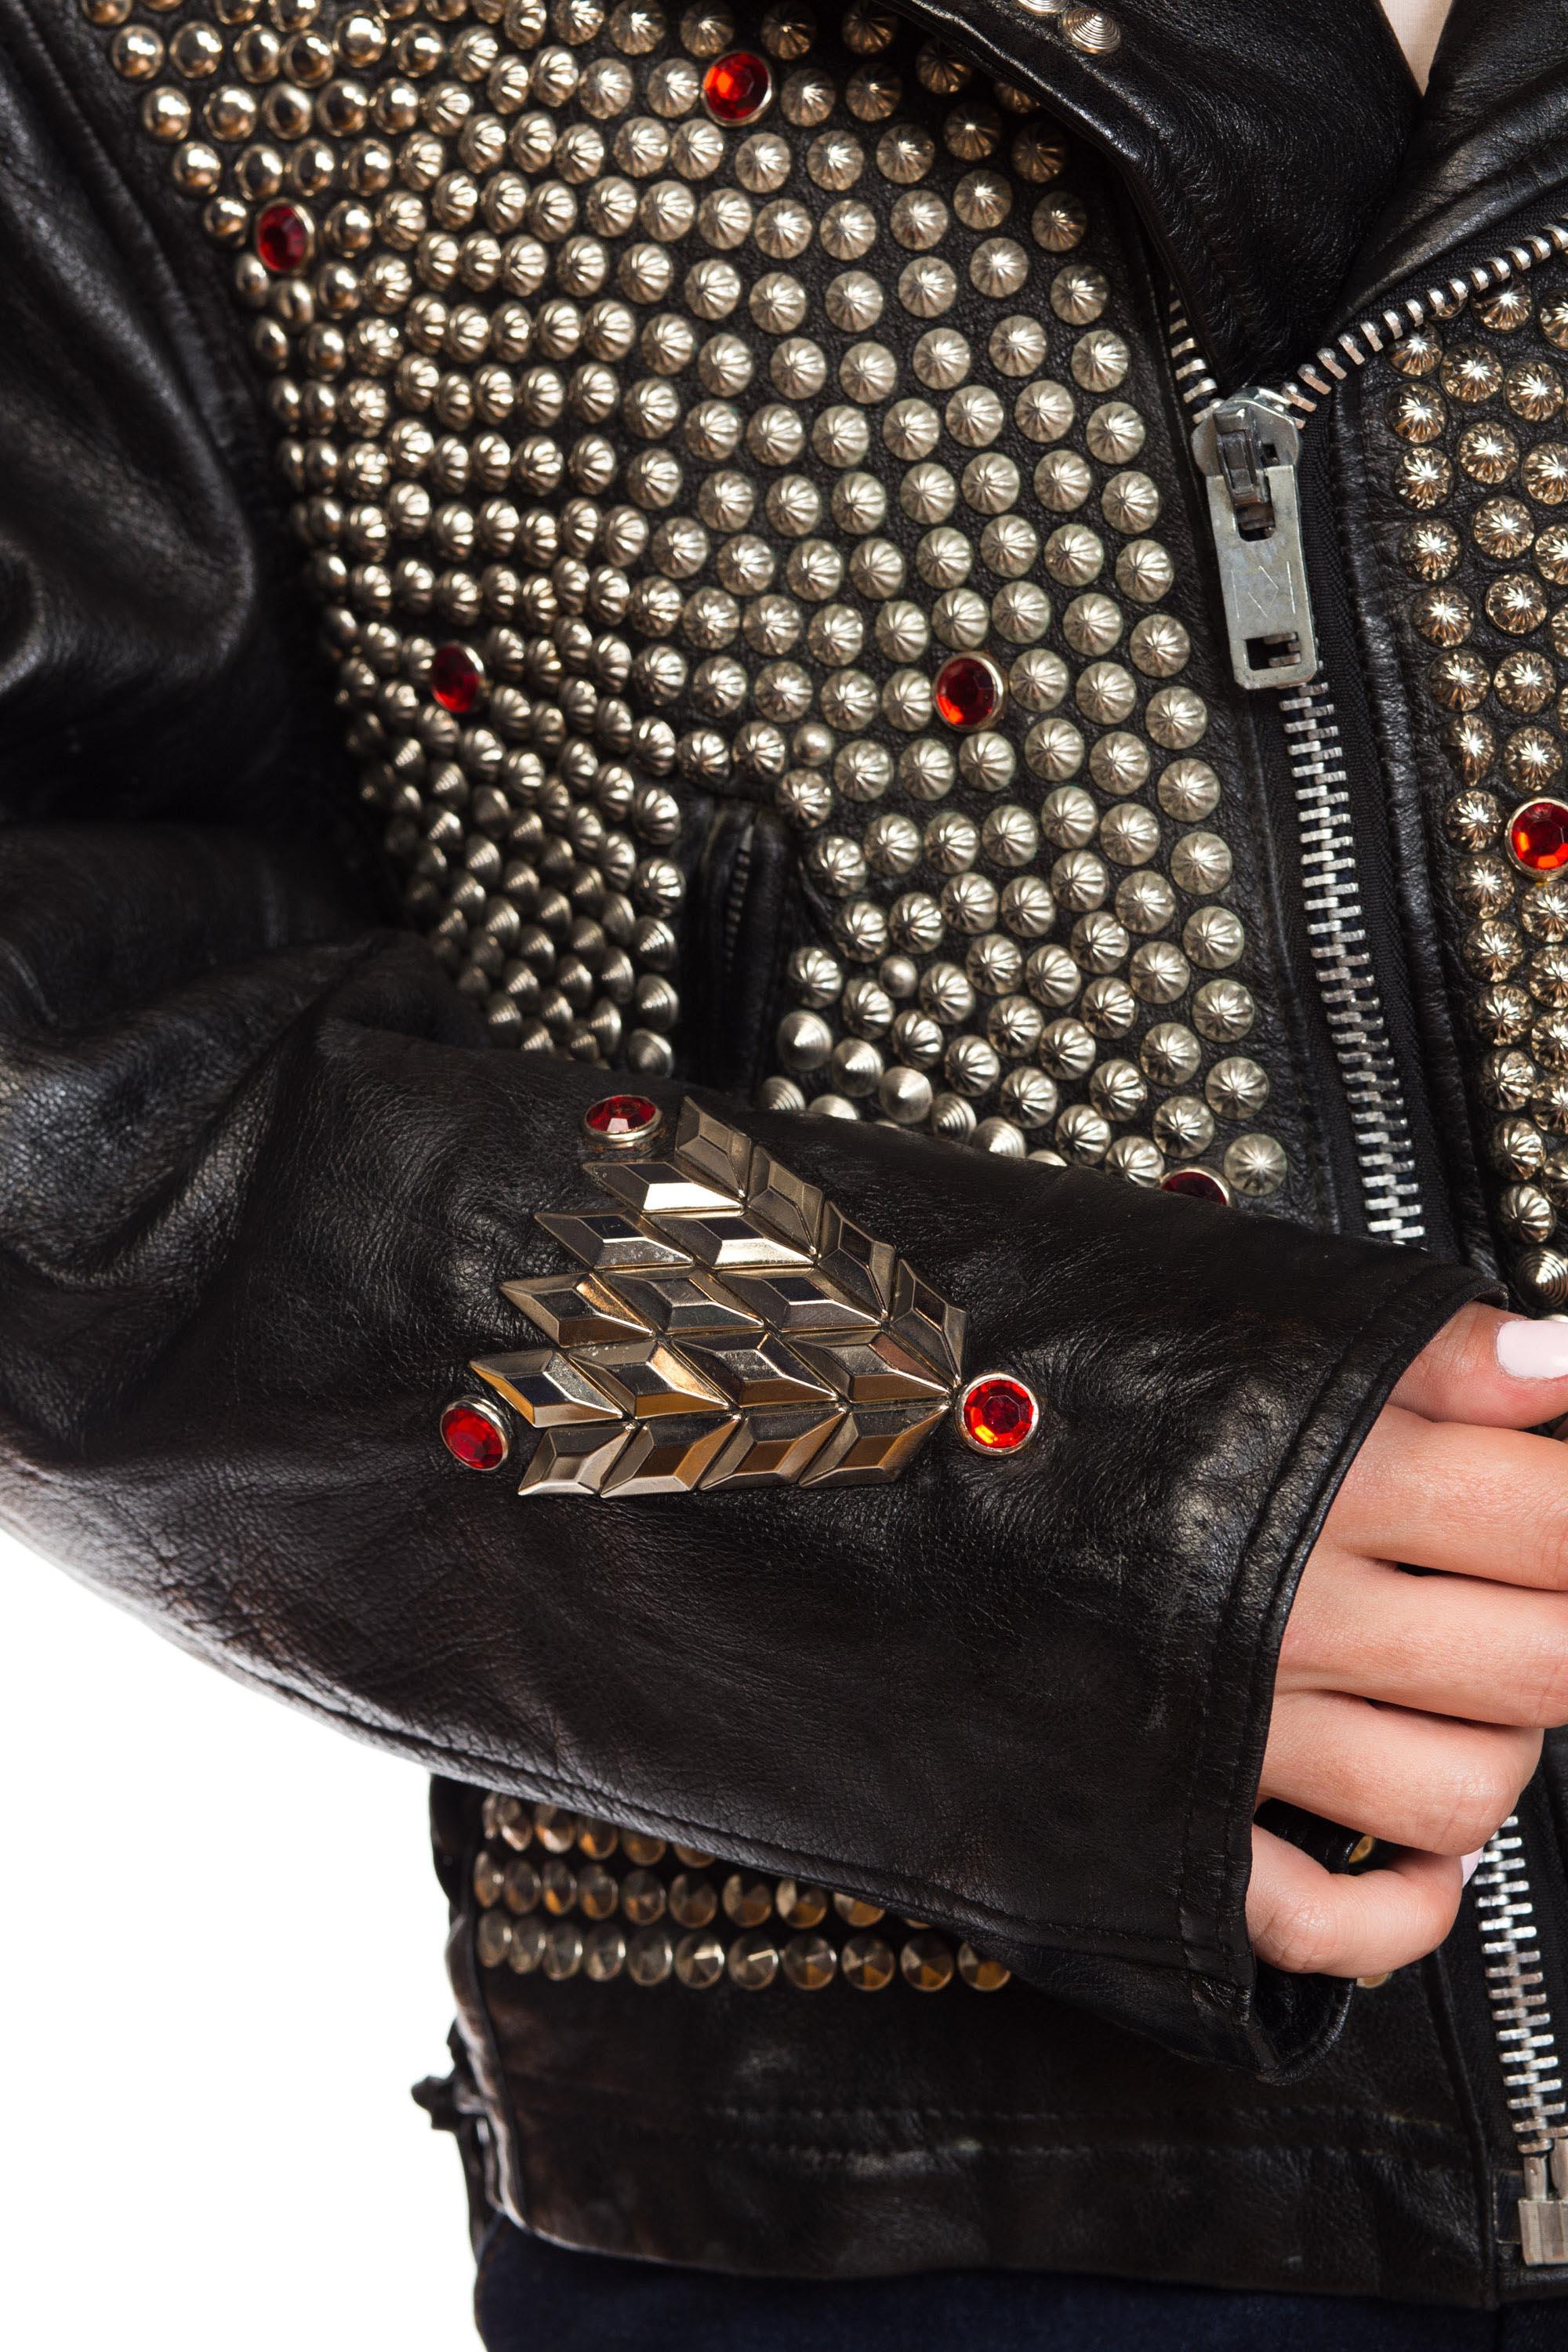 1990S JEFF HAMILTON Men's Studded Leather Biker Jacket With Crystals And Eagle For Sale 3